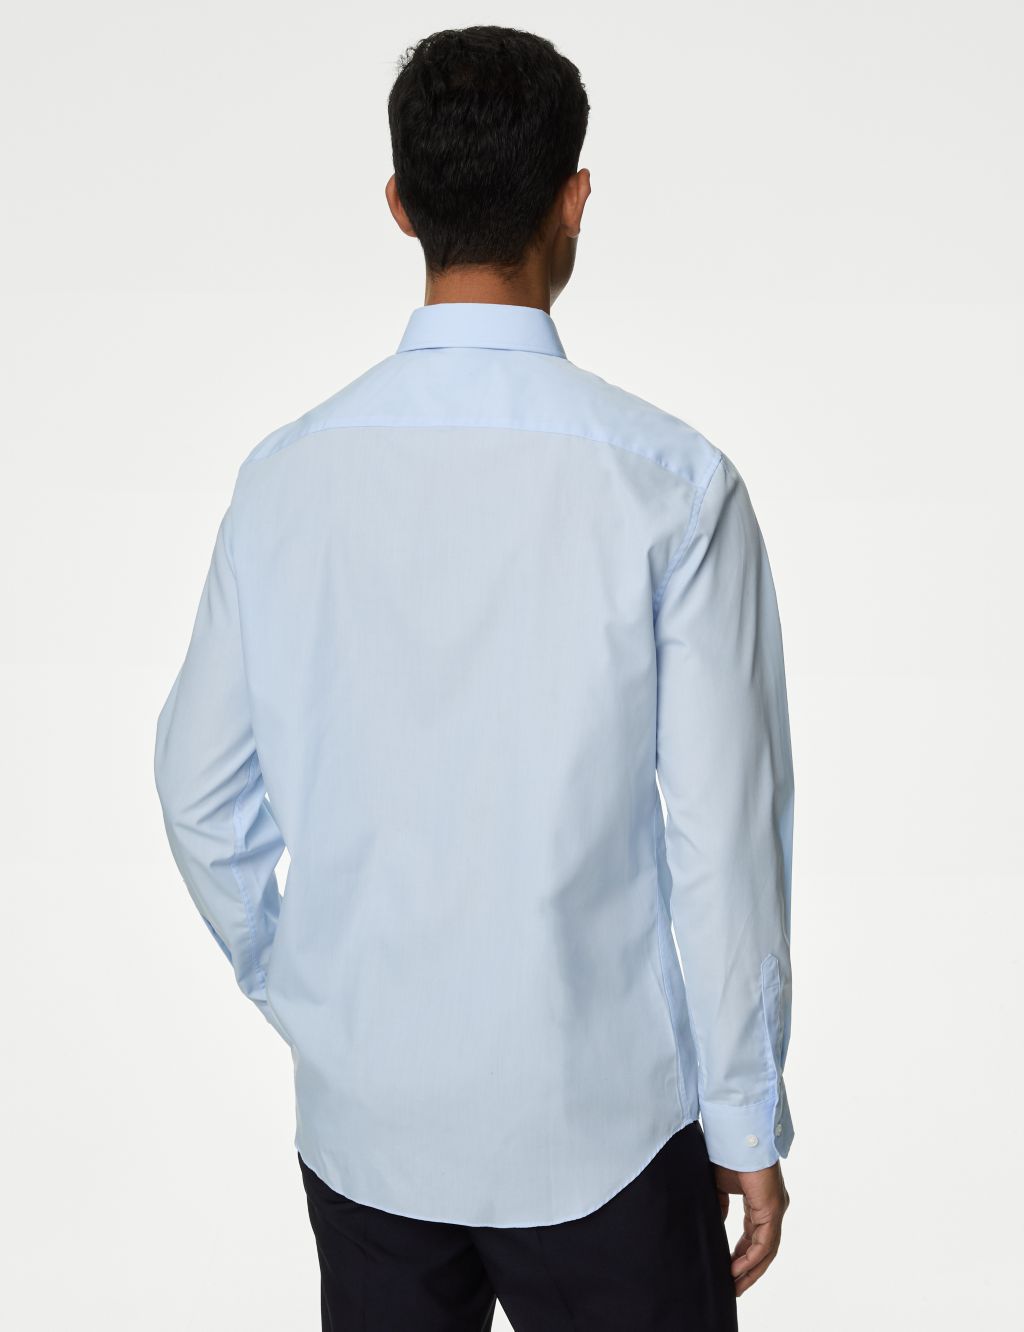 3pk Tailored Fit Long Sleeve Shirts image 3